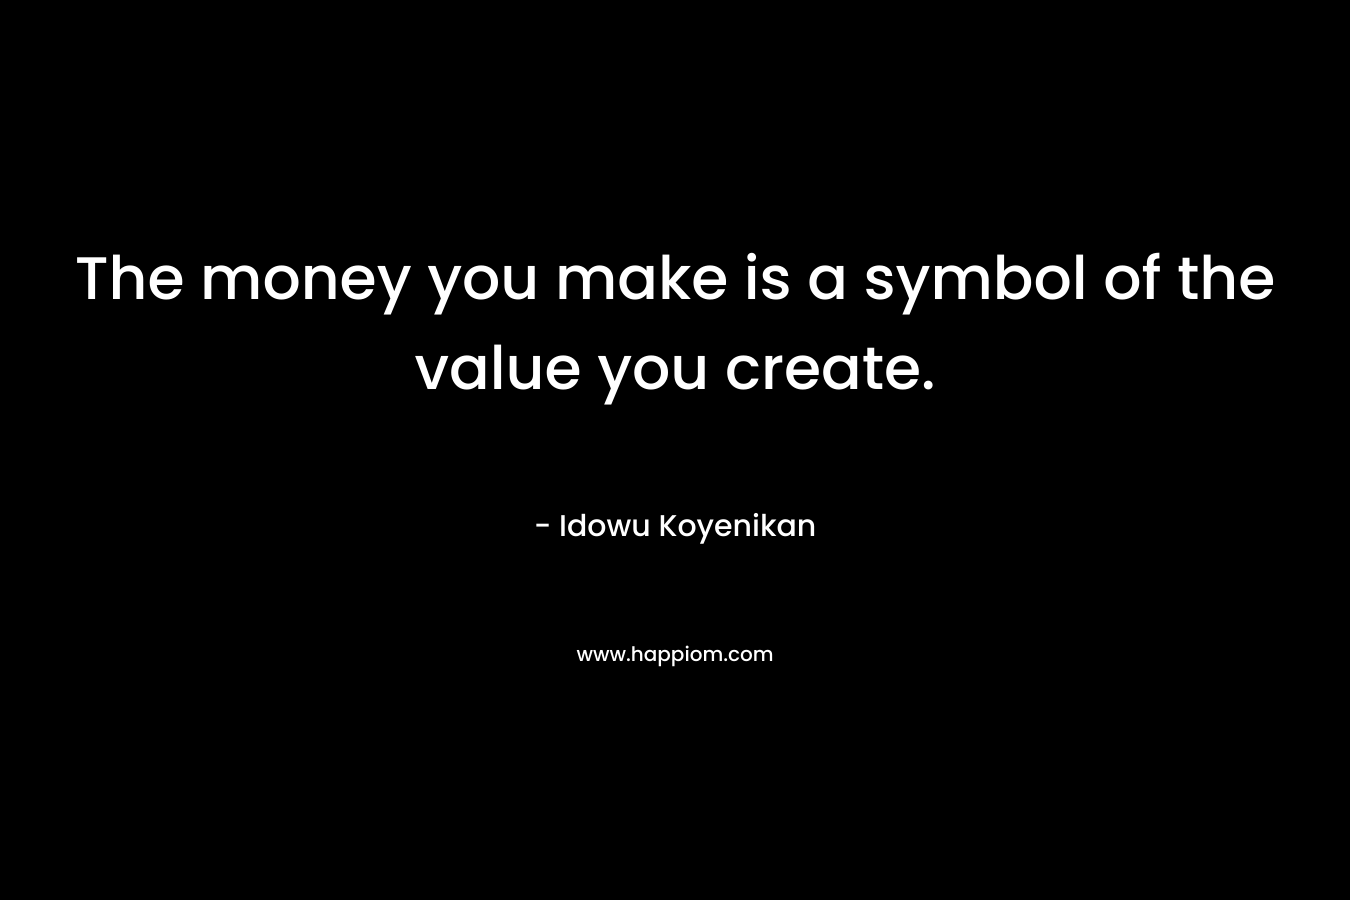 The money you make is a symbol of the value you create.